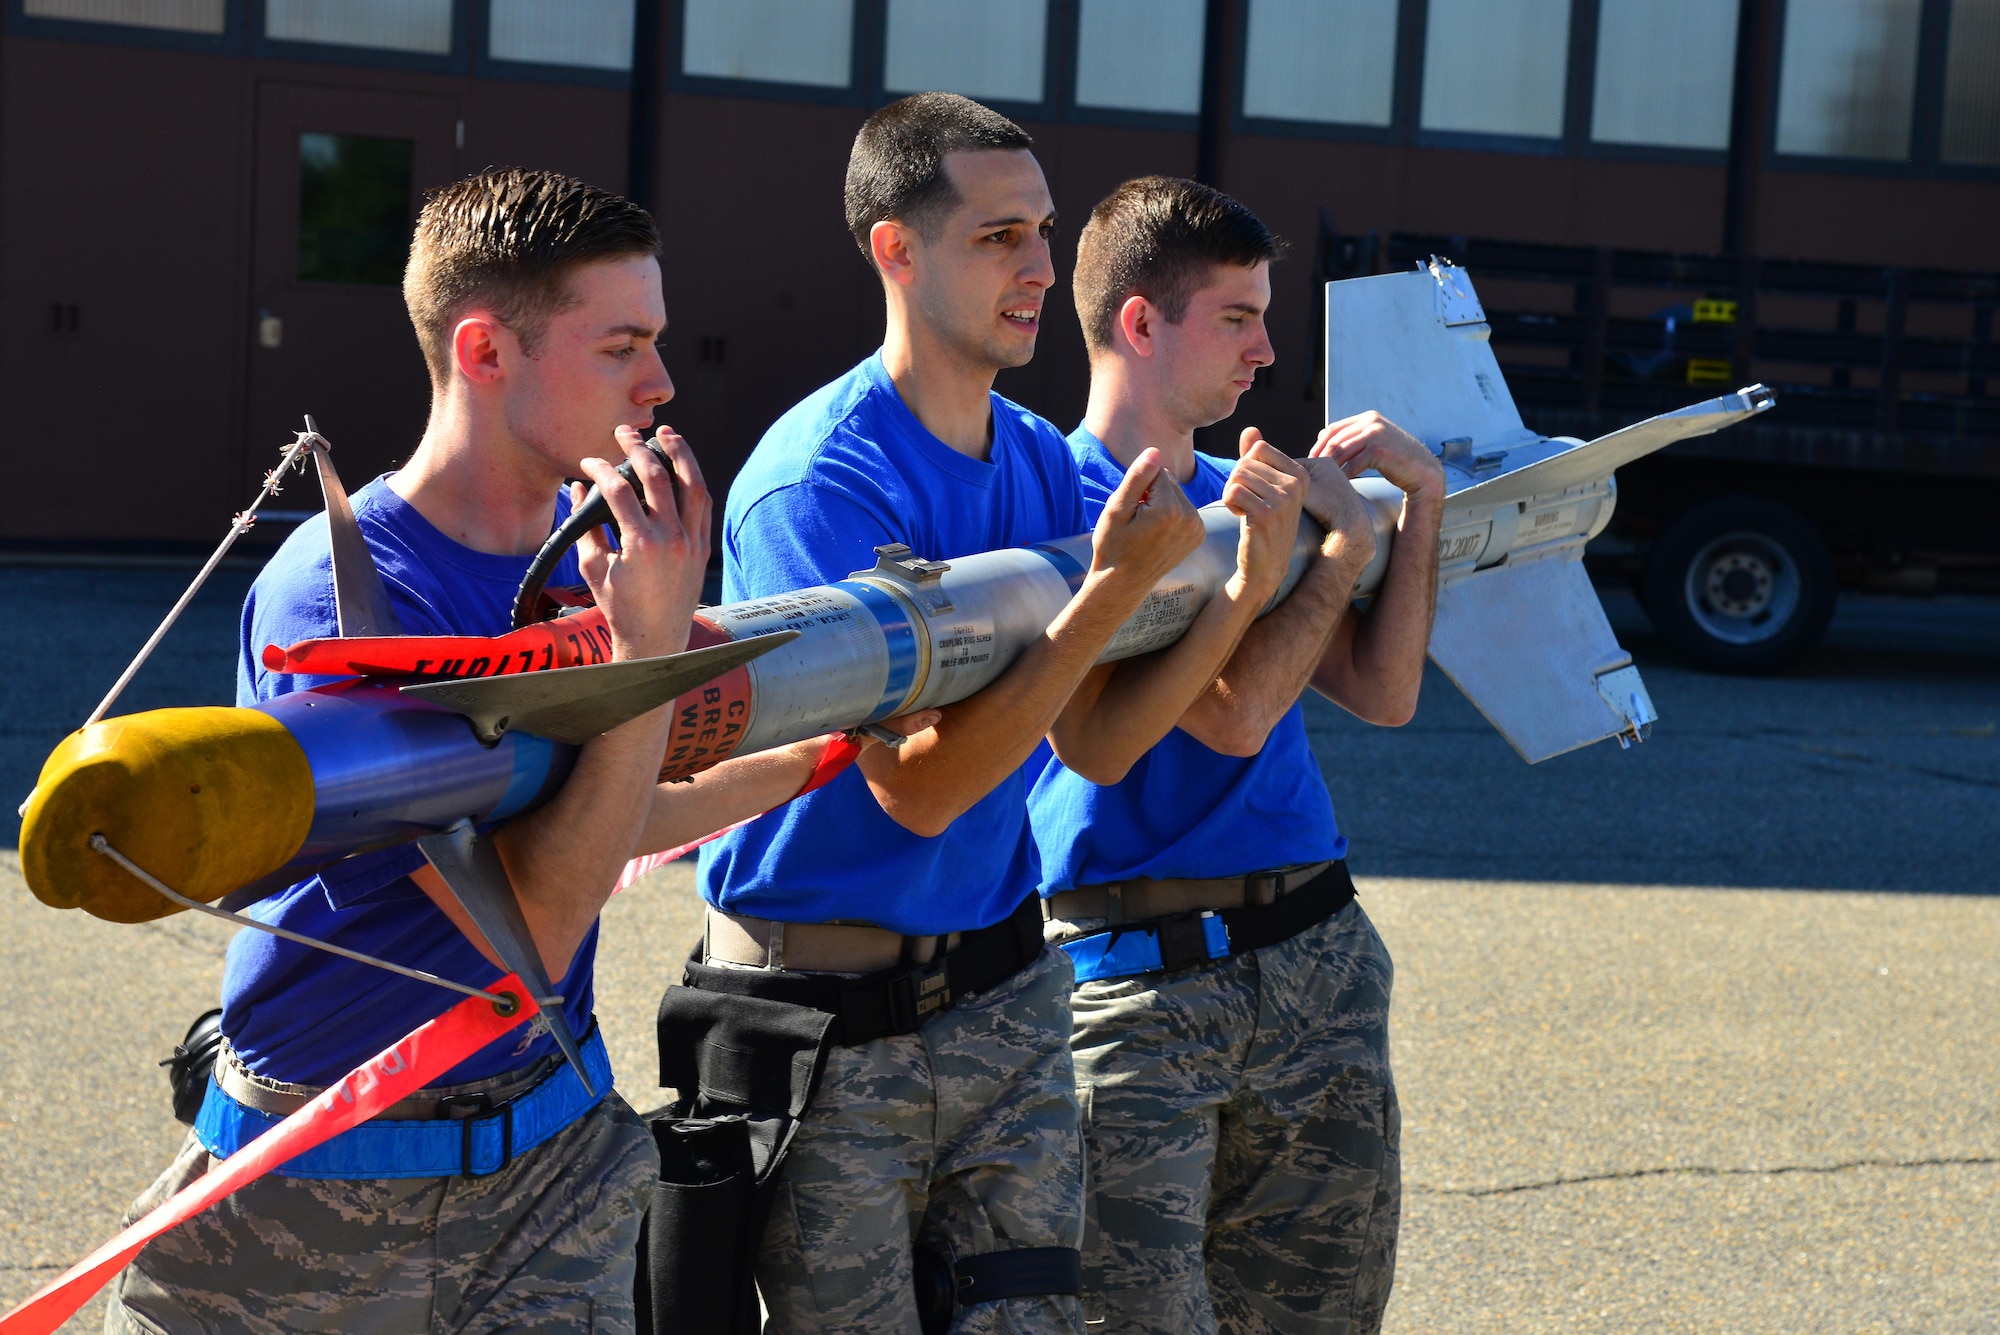 U.S. Air Force Airmen from the 94th Aircraft Maintenance Unit, carry munitions to an F-22 Raptor during the 1st Maintenance Squadron Weapons Load Crew of the Quarter competition at Joint Base Langley-Eustis, Va., Oct. 28, 2016. 1st Maintenance Group maintainers are responsible for worldwide rapid deployment and employment of combat-ready and mission-capable F-22s. (U.S. Air Force photo by Airman 1st Class Tristan Biese)